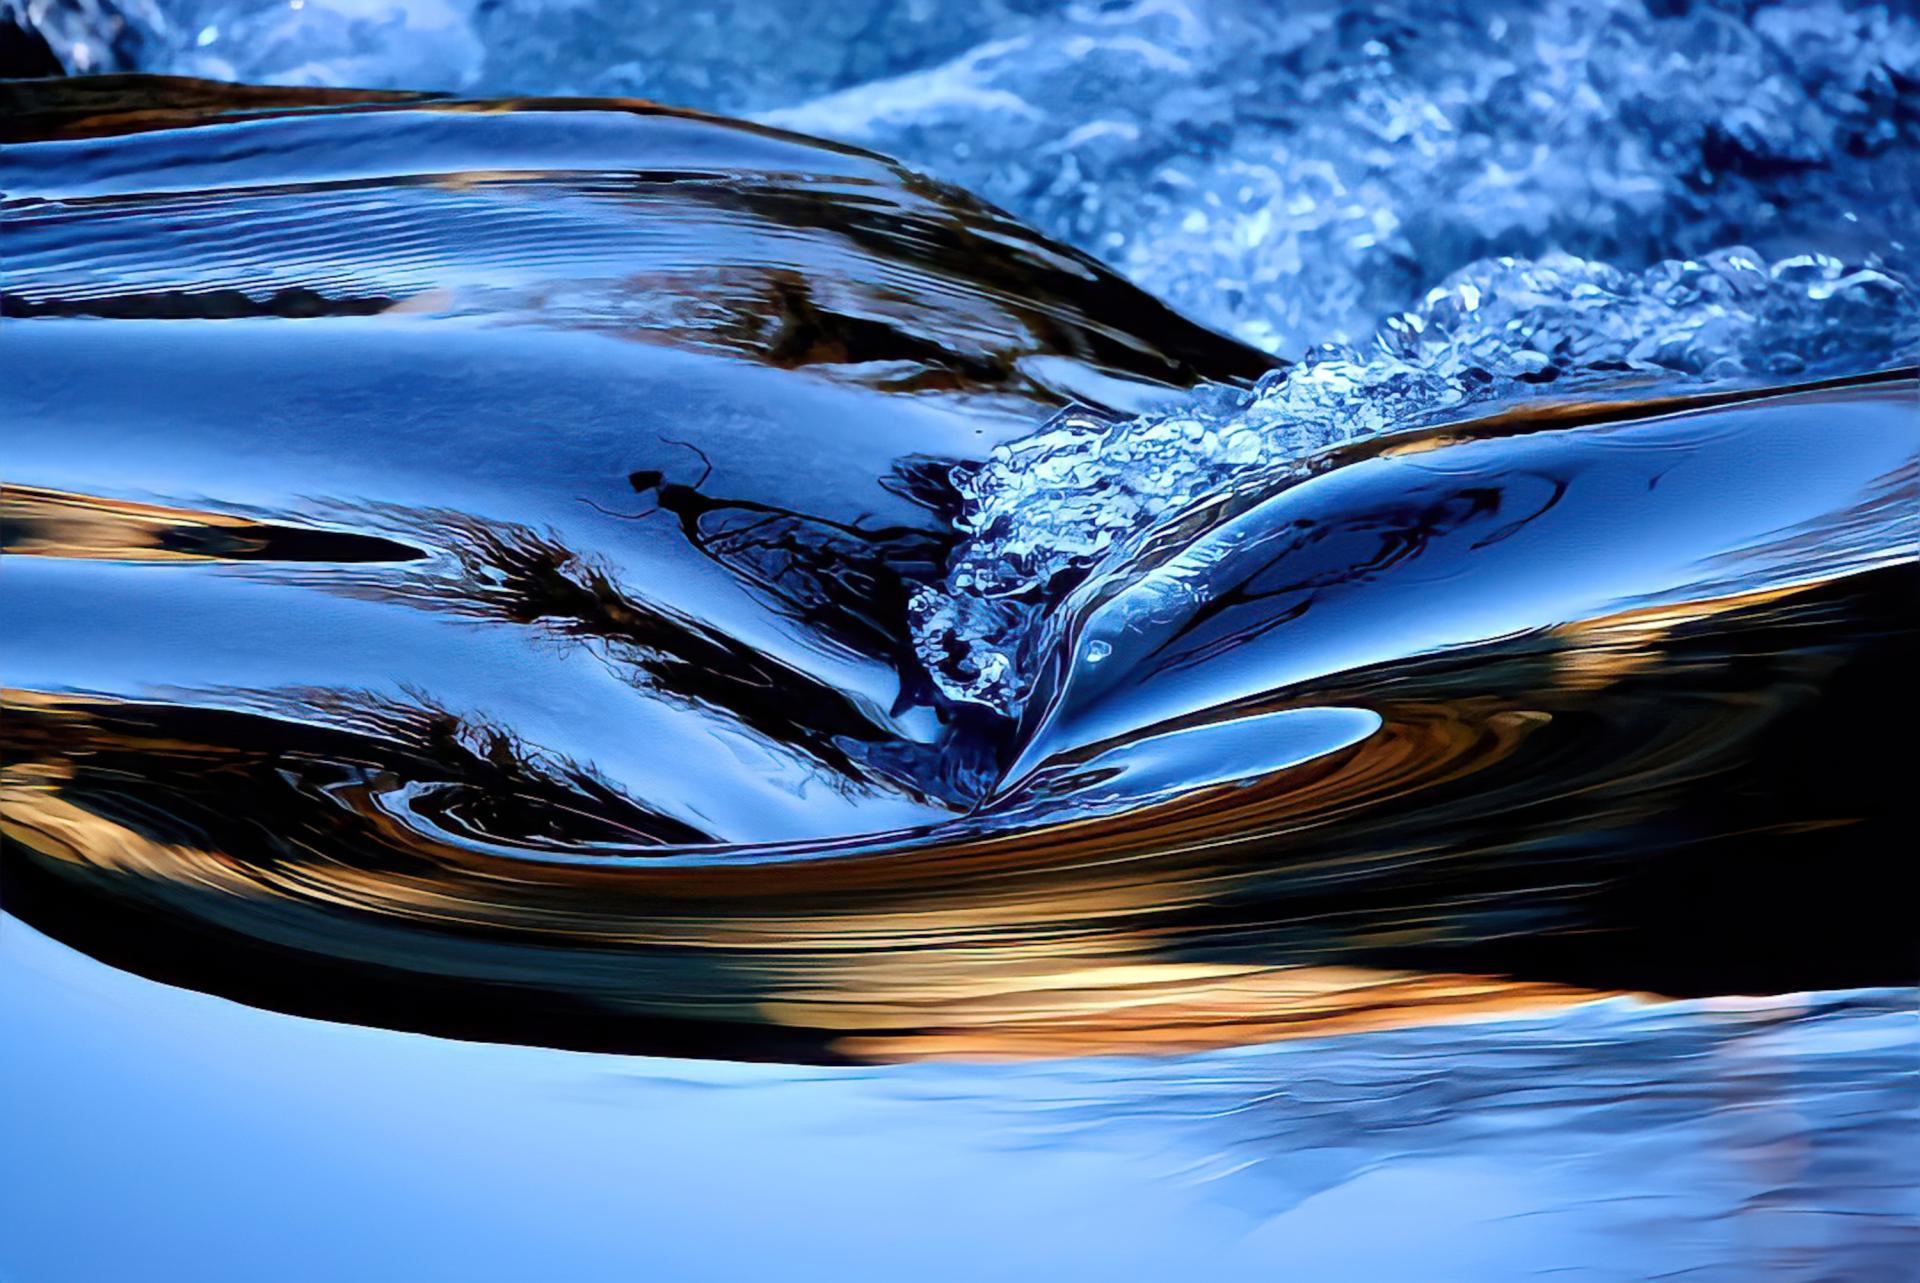 New York Photography Awards Winner - The shapes of water